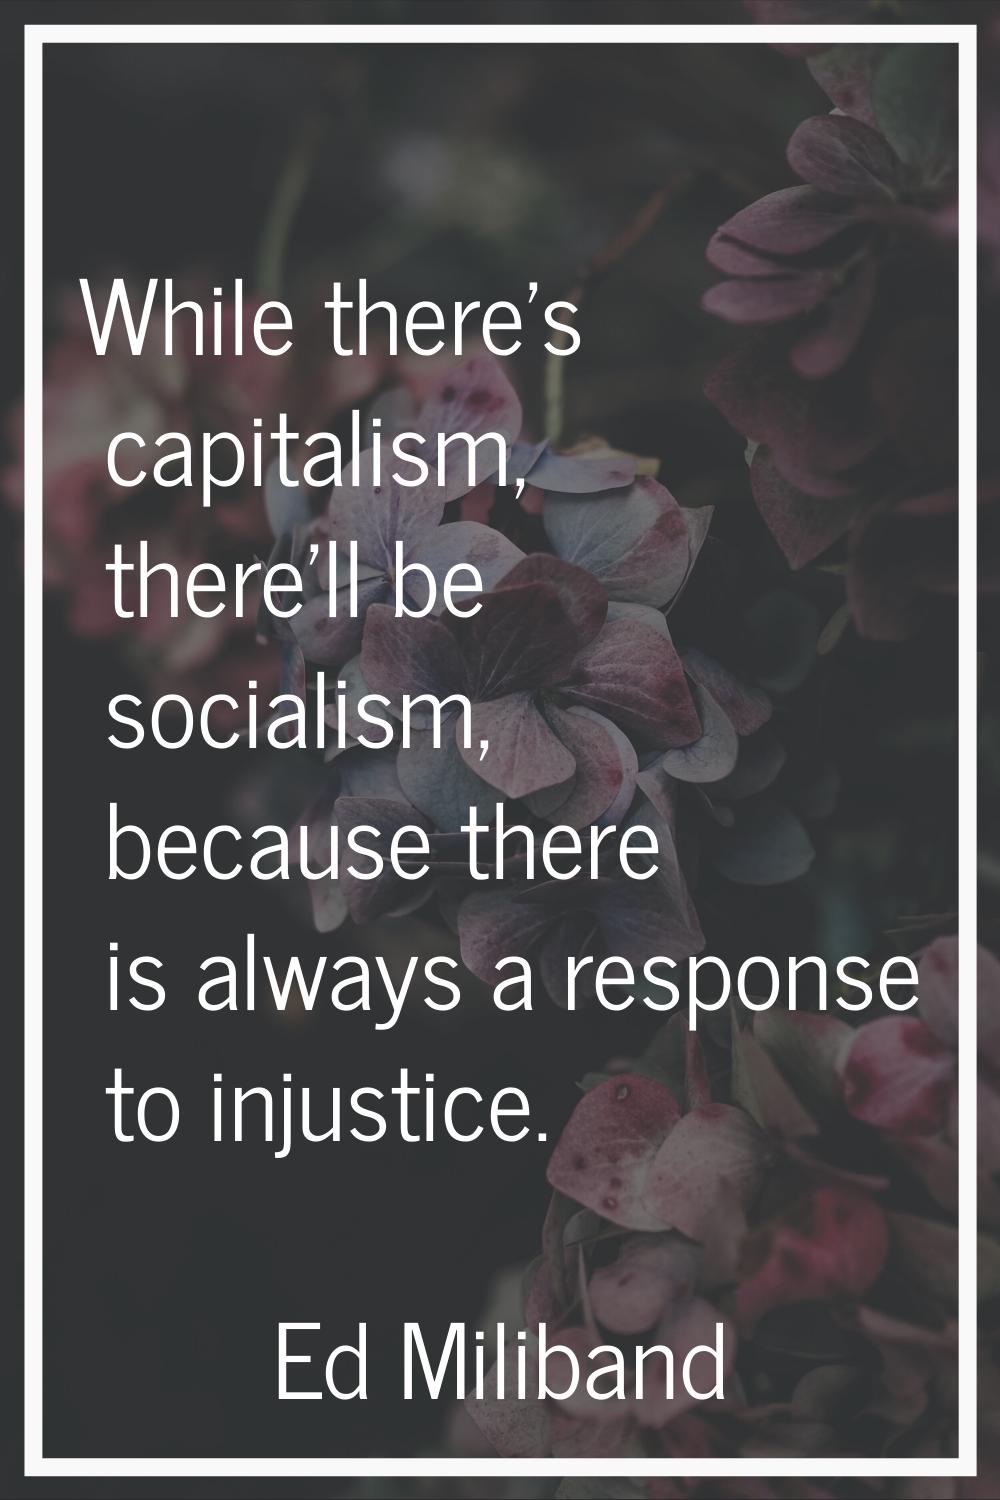 While there's capitalism, there'll be socialism, because there is always a response to injustice.